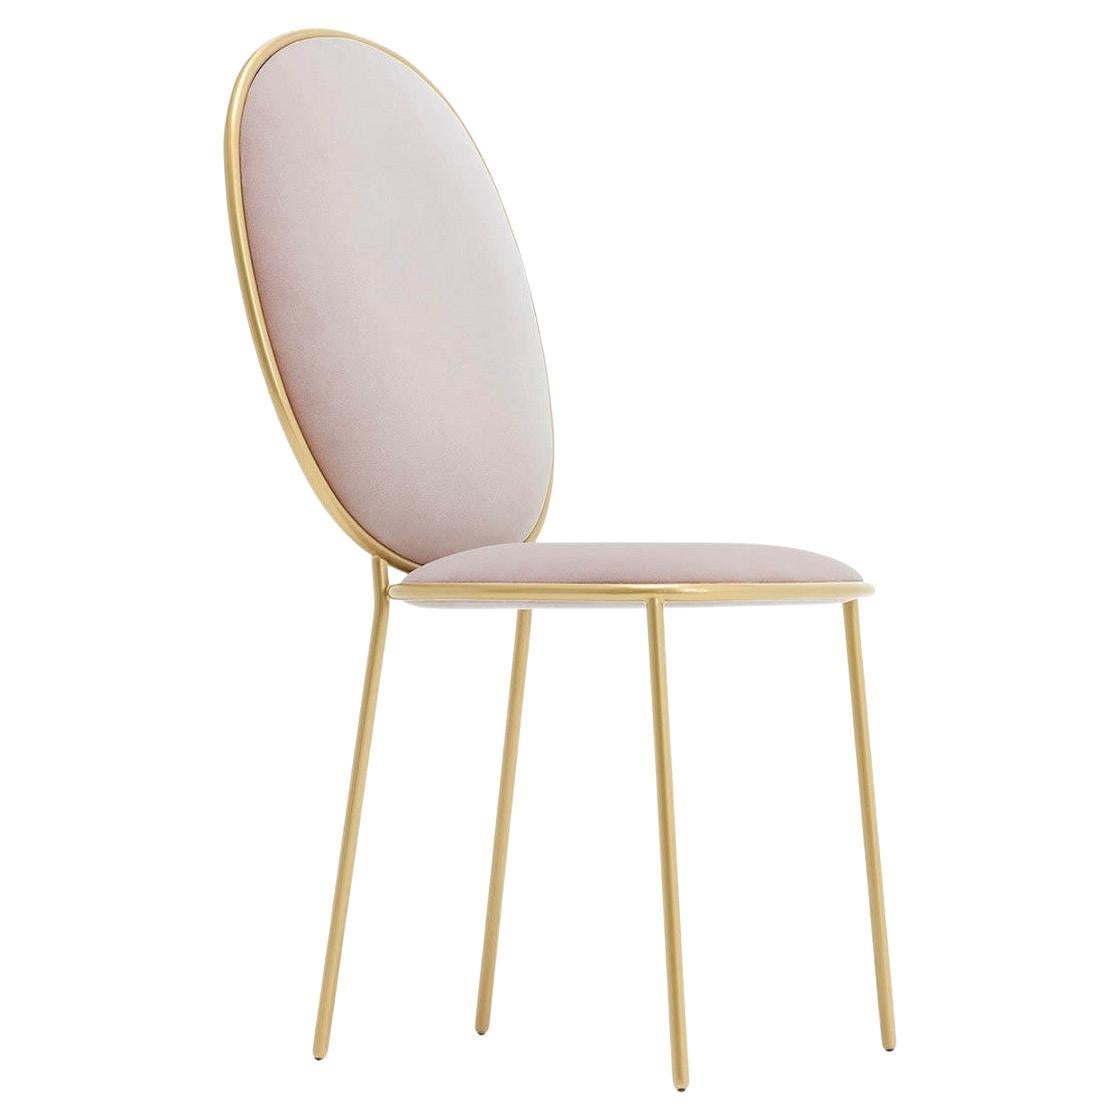 Contemporary Pink Velvet Upholstered Dining Chair, Stay by Nika Zupanc